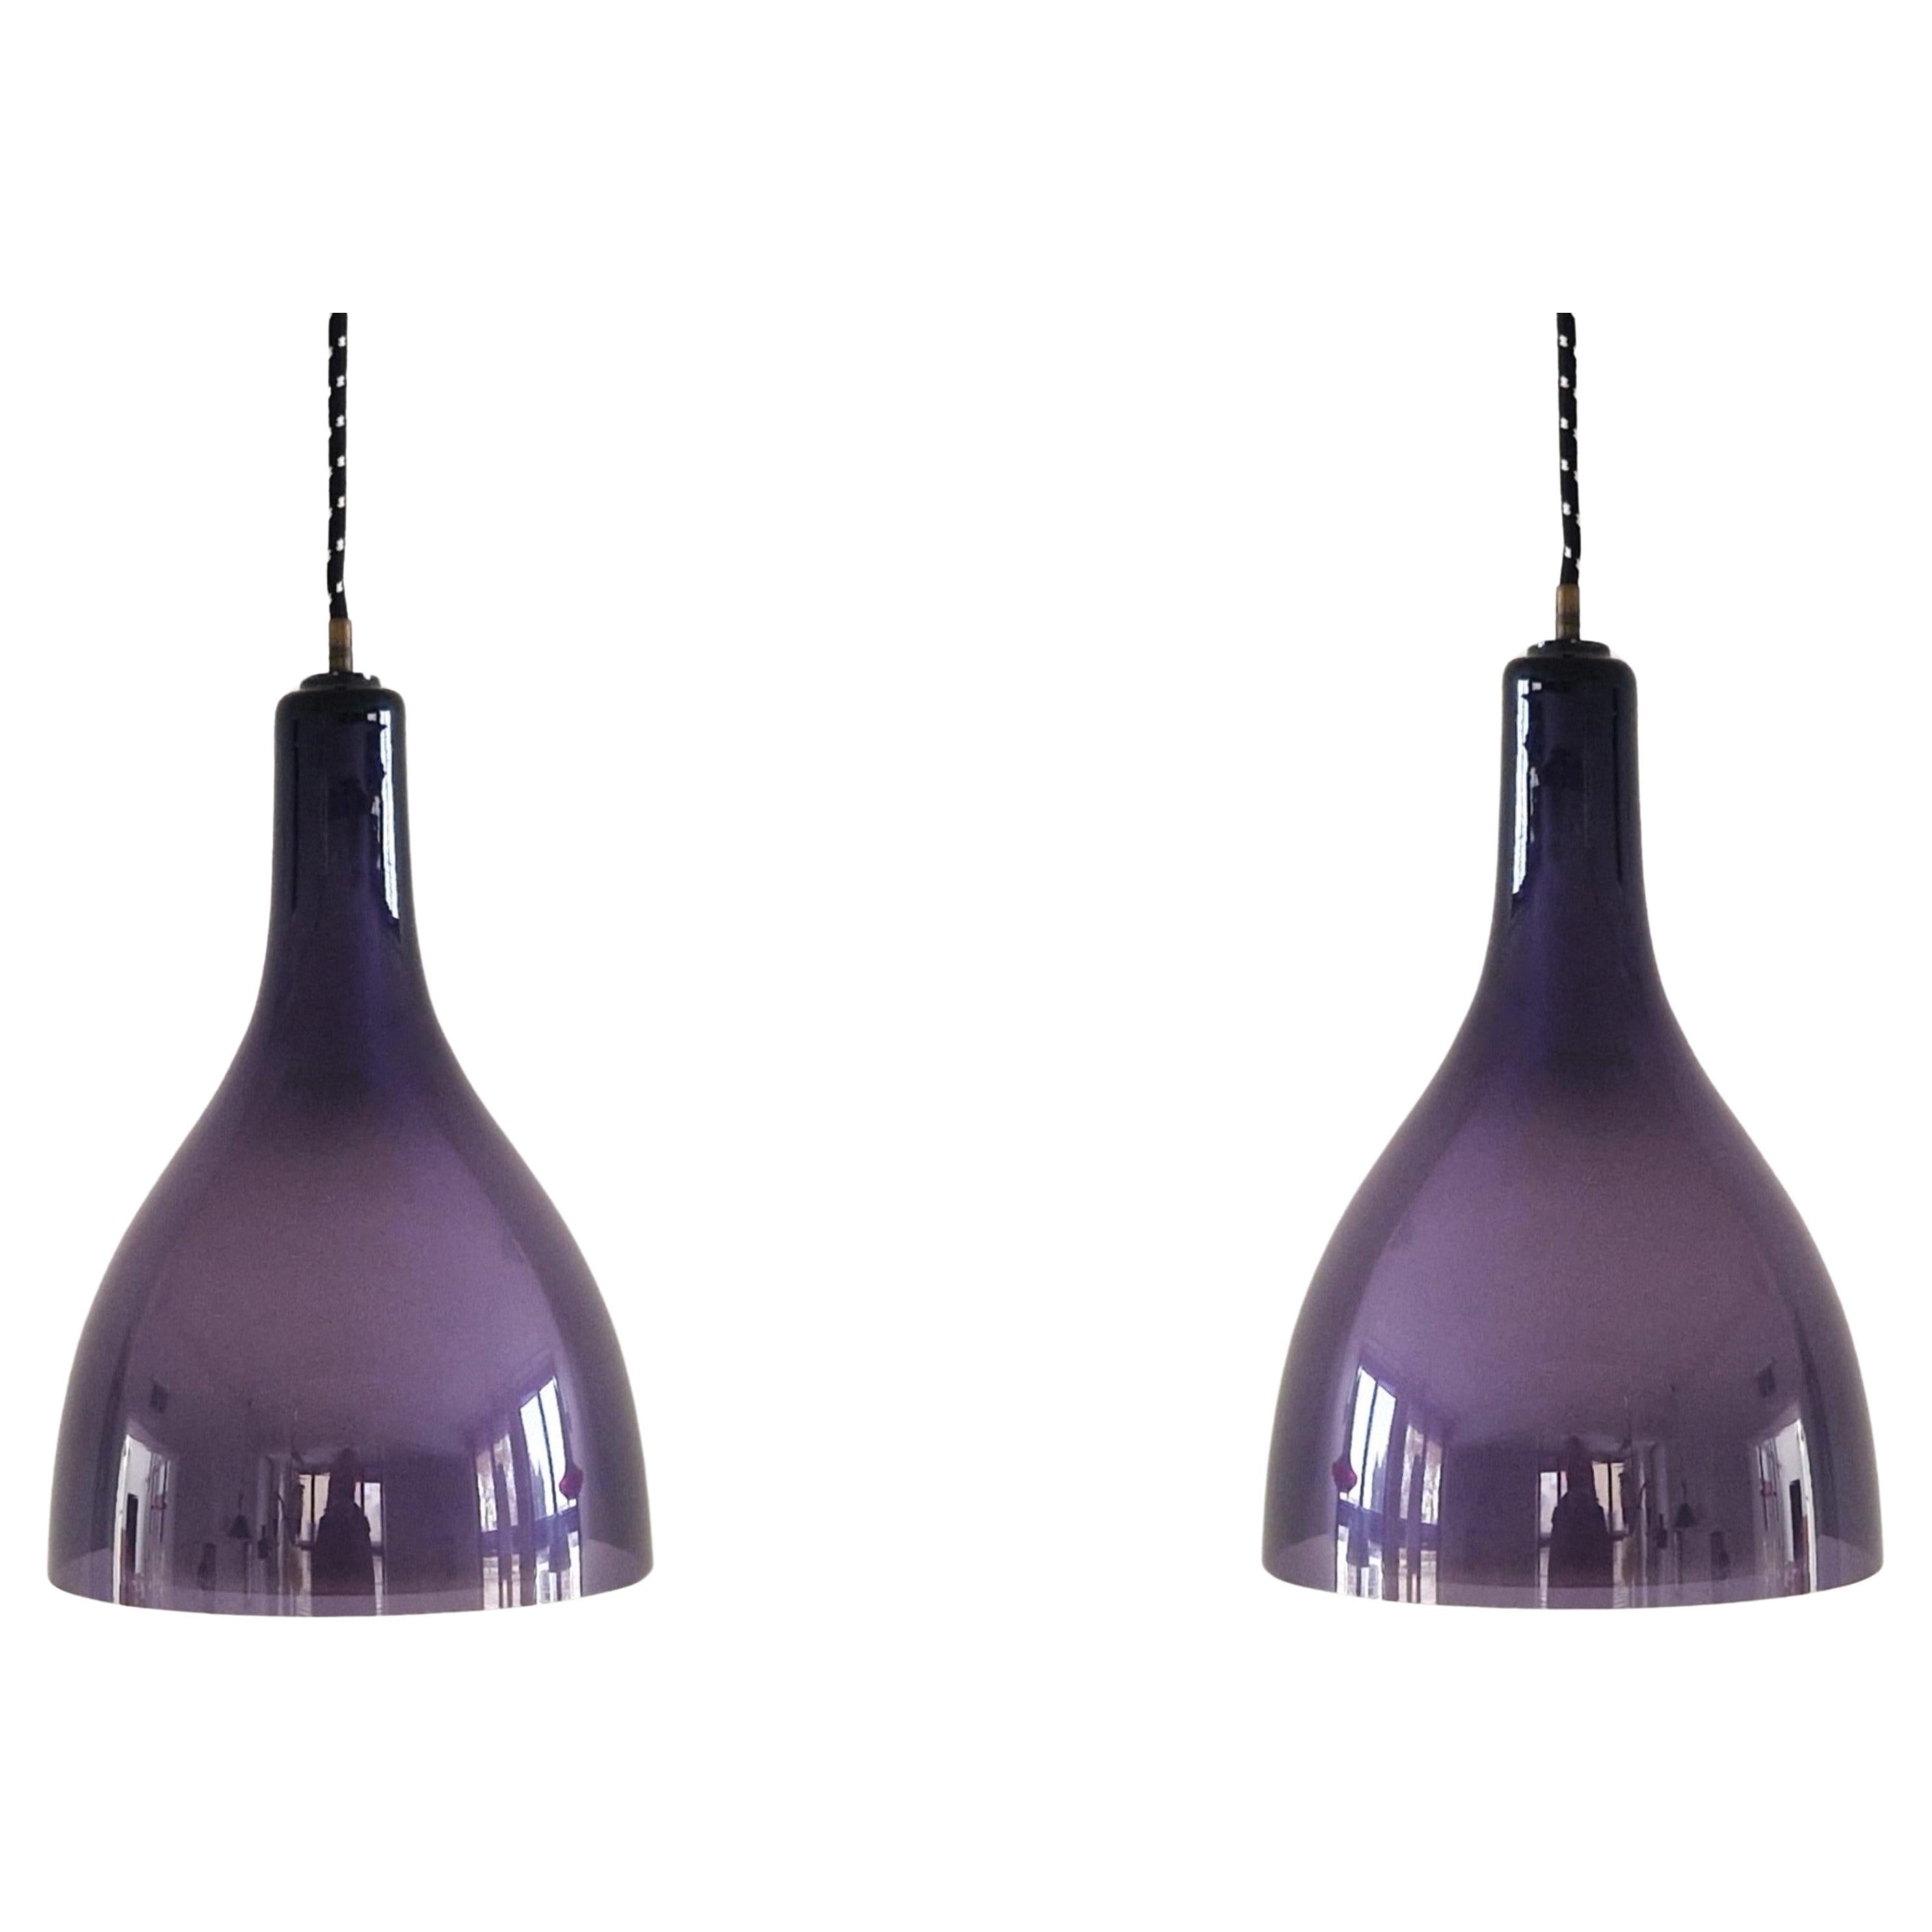 Set of 2 purple and white glass pendant lamps, 1960's / 1970's